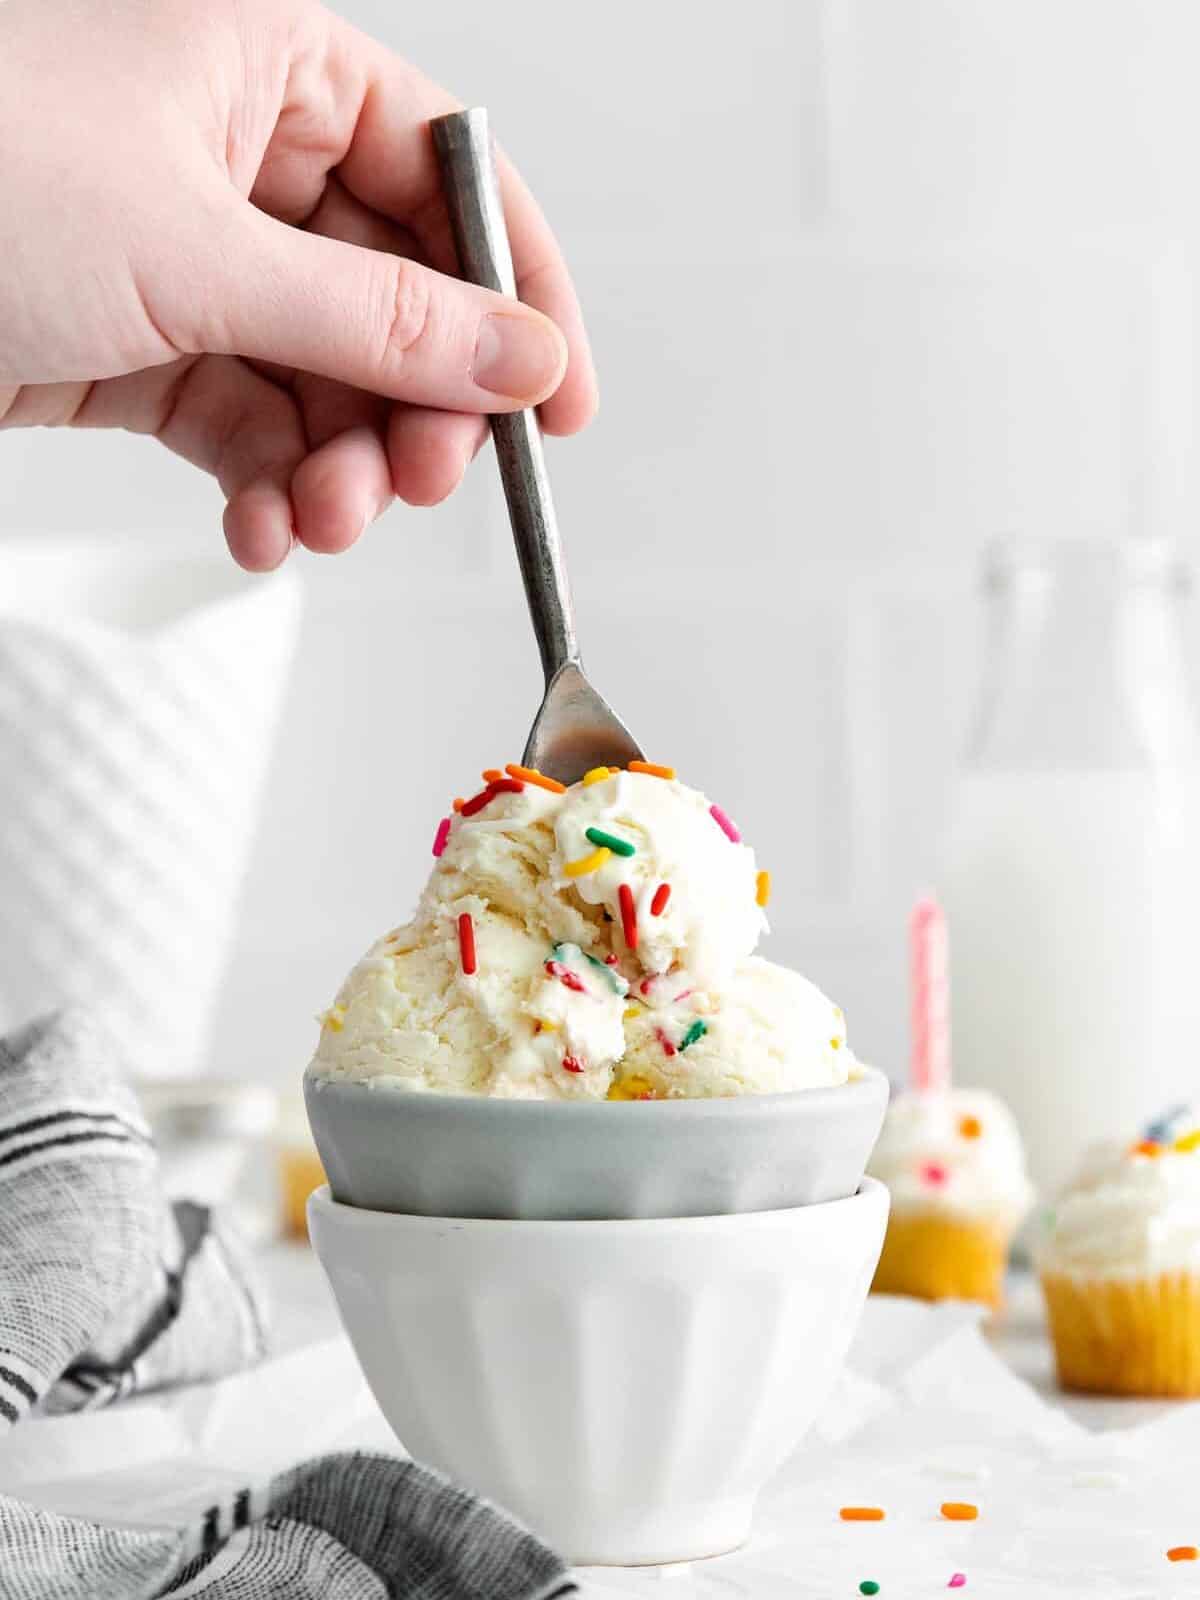 side view of a hand plunging a spoon into birthday cake ice cream in a gray bowl set in a white bowl.